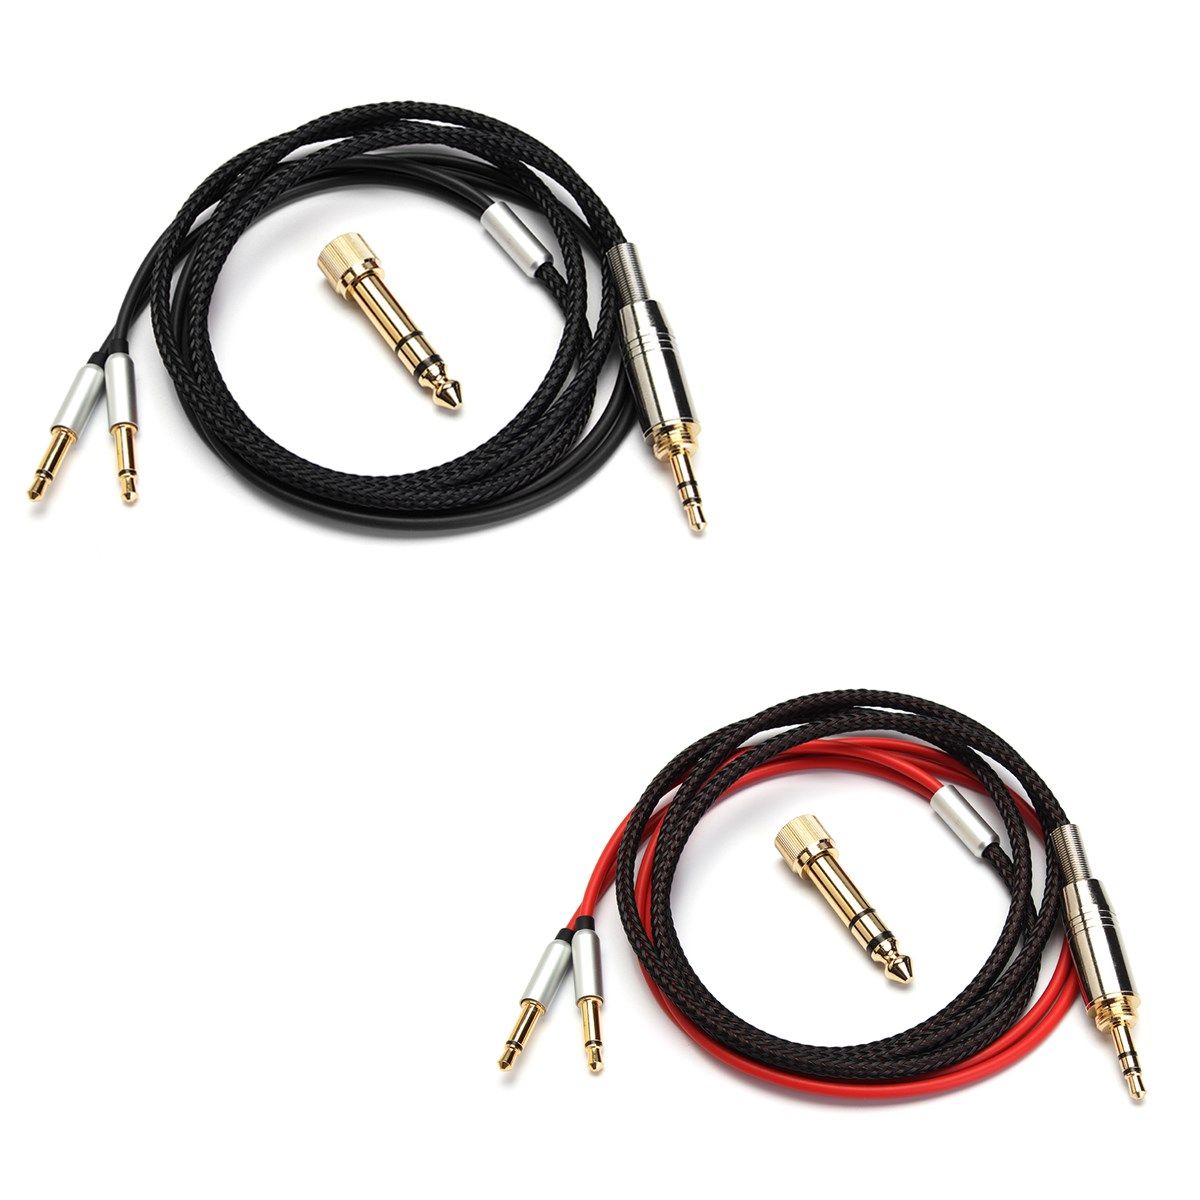 Replacement-Audio-Upgrade-Cable-For-Meze-99-Classics-Focal-Elear-Headphone-1320420